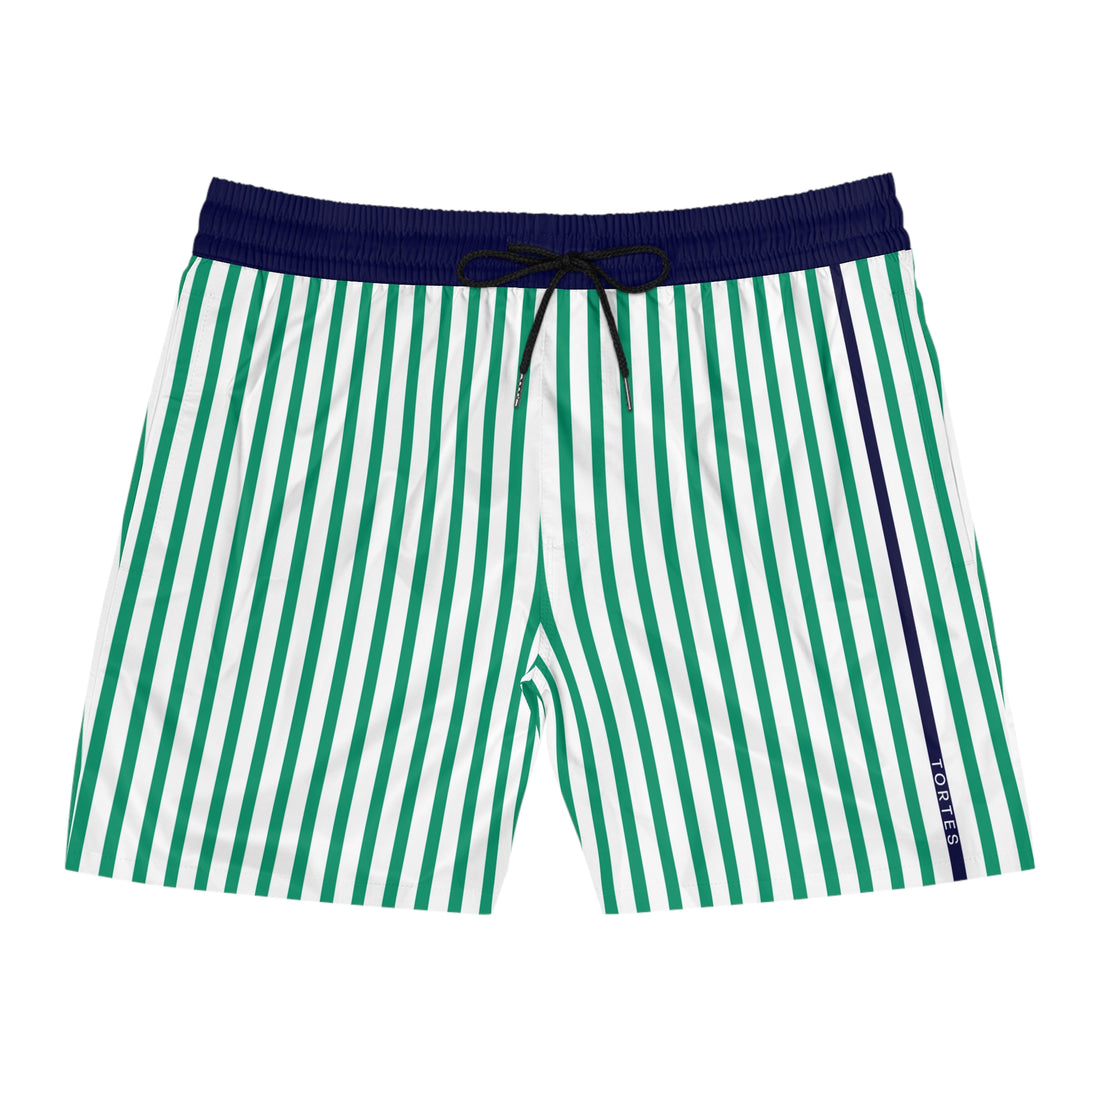 SIR Collection Men's PS Swim Shorts